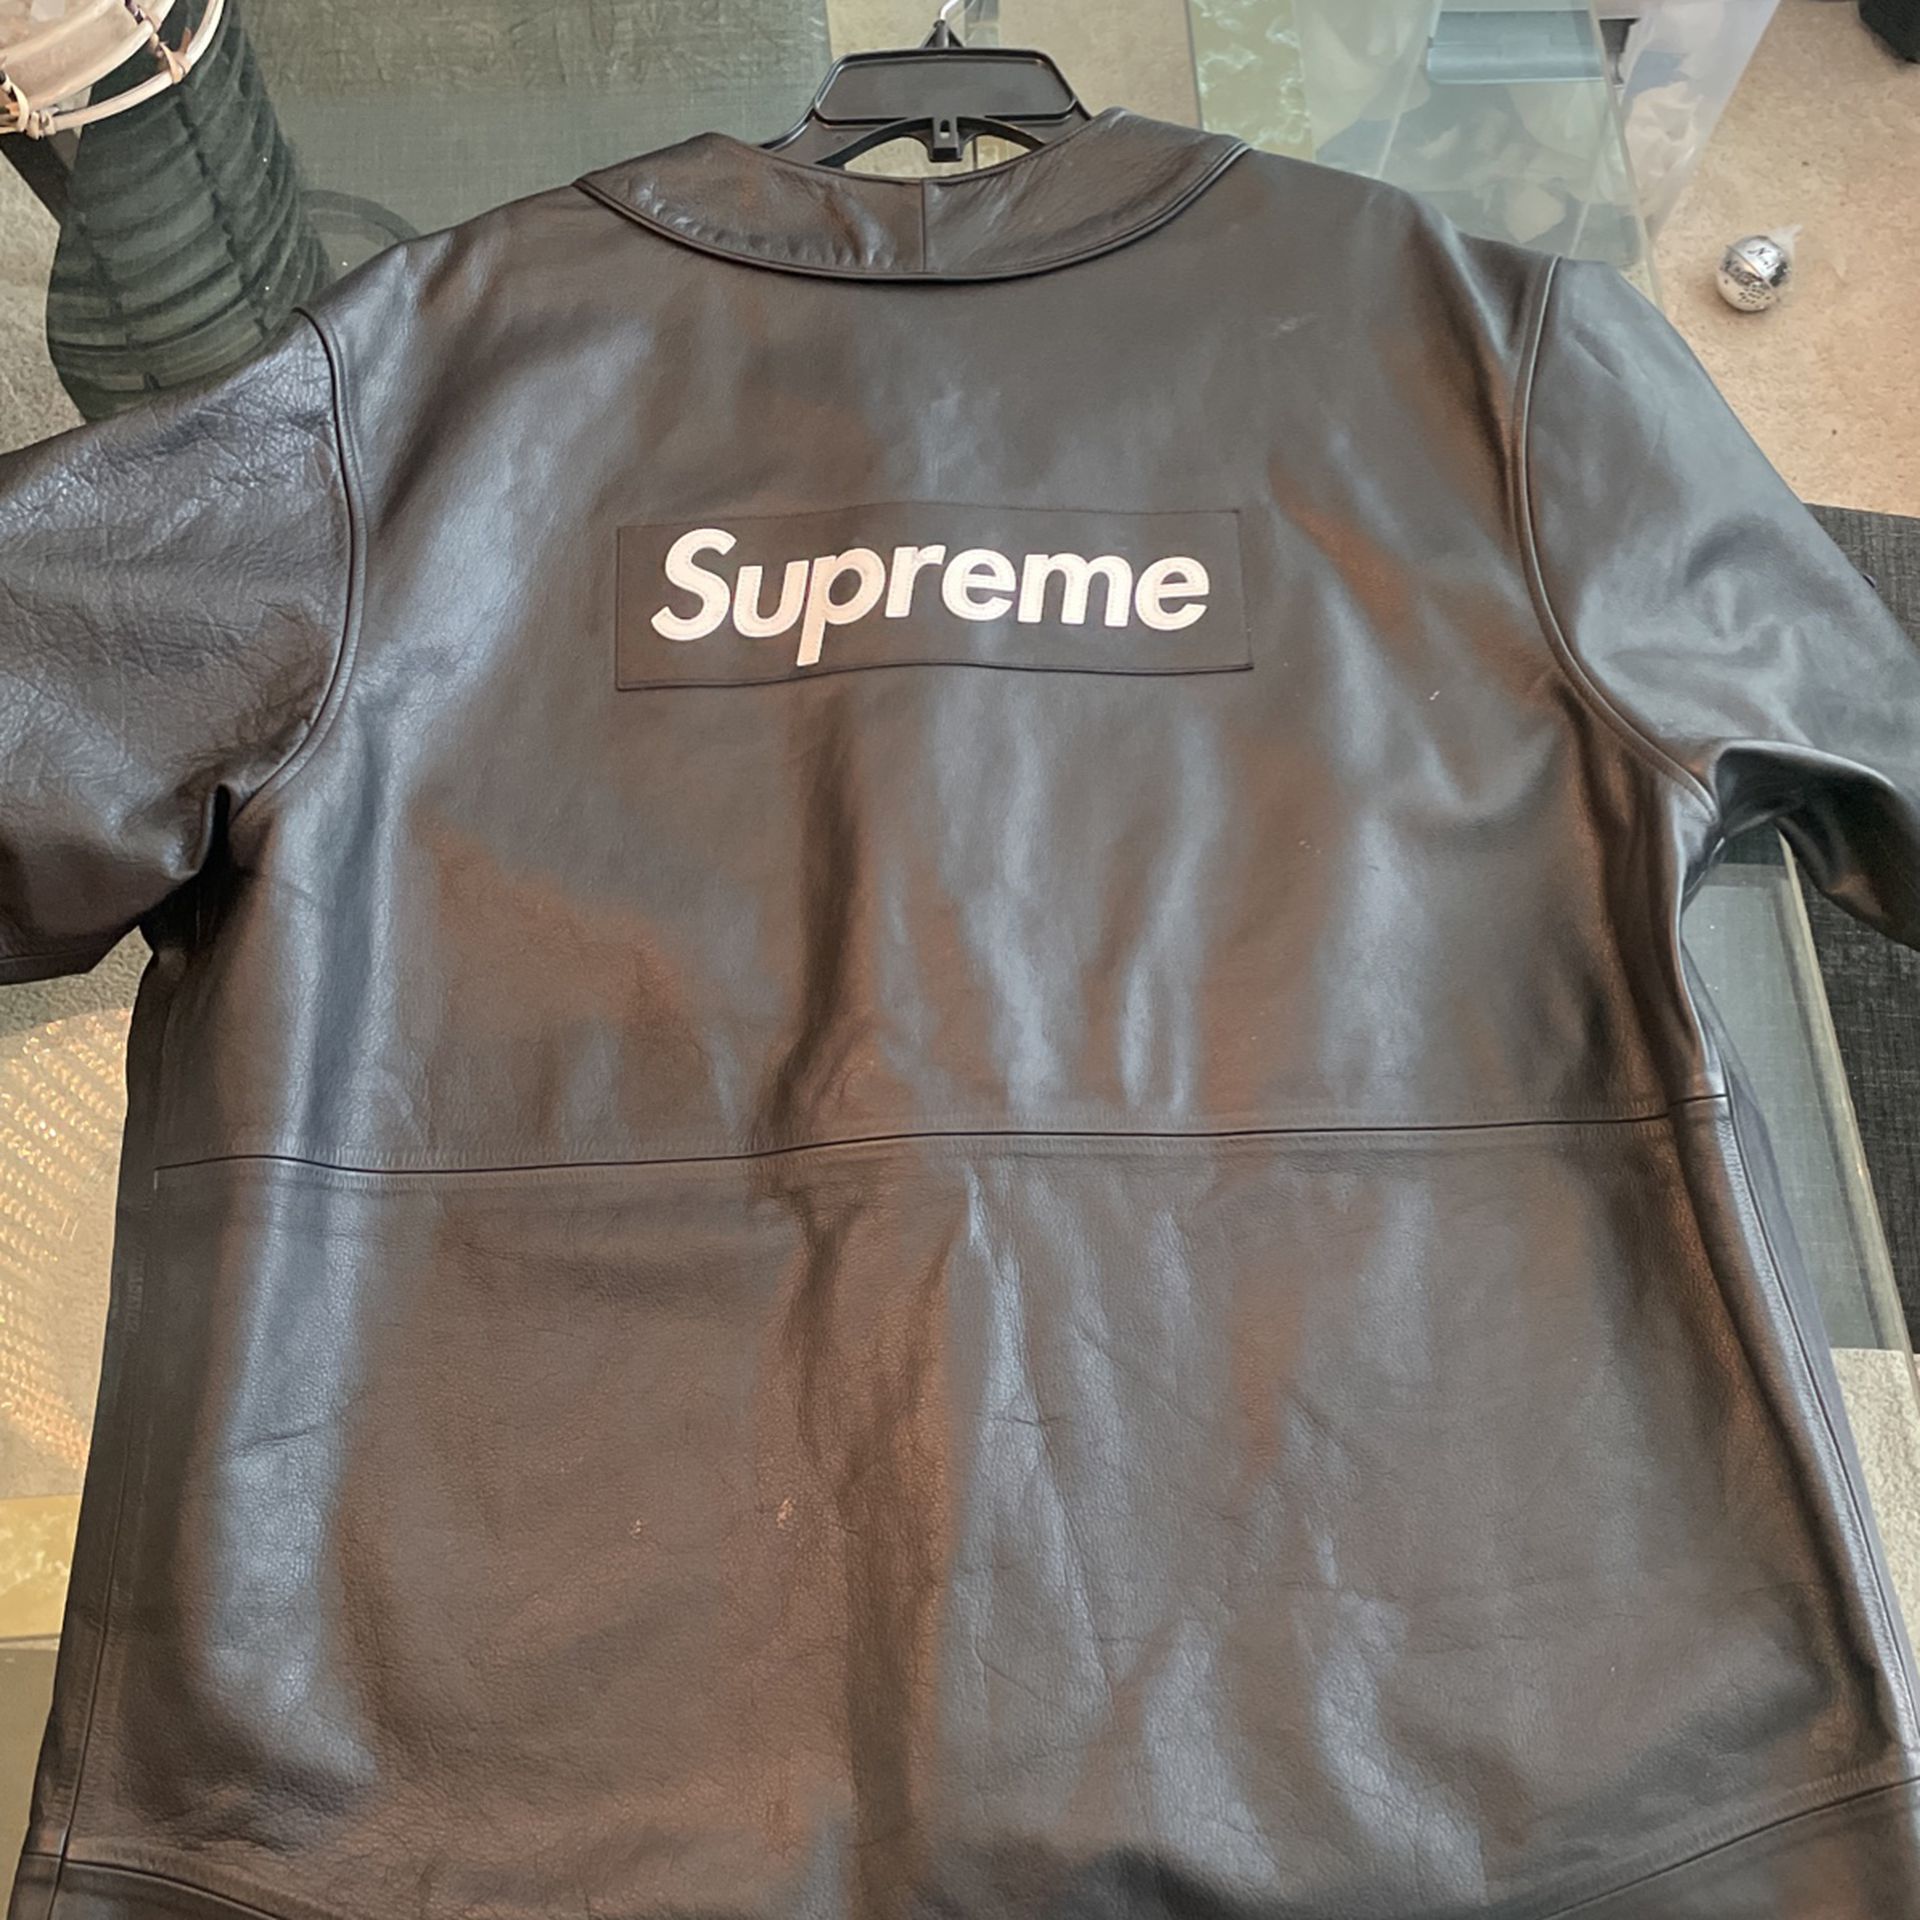 Supreme X Nike Leather Baseball Jersey for Sale in Naperville, IL - OfferUp